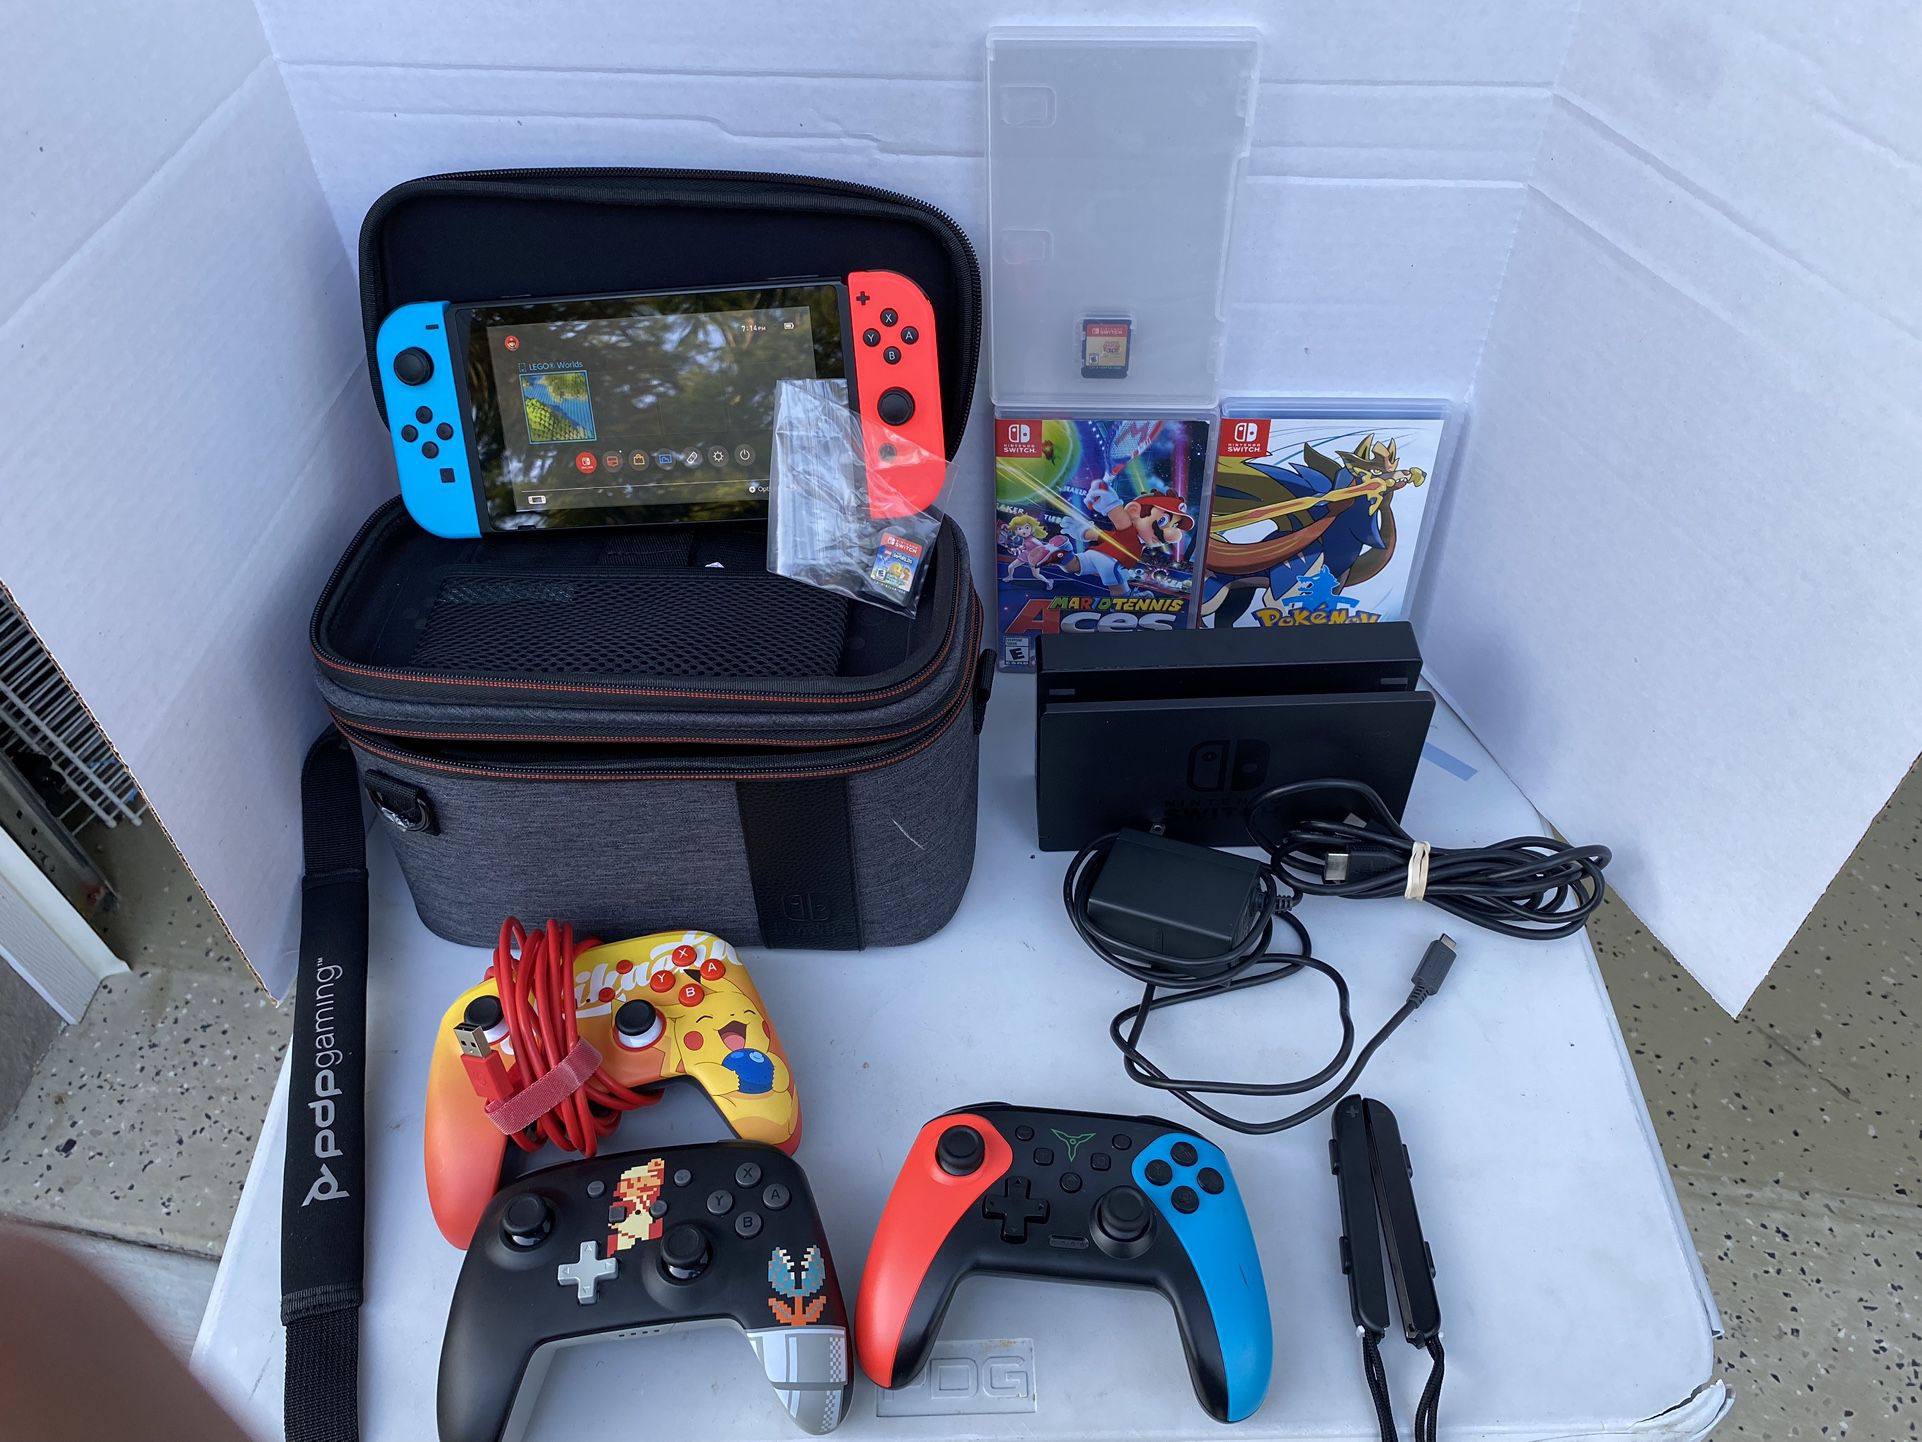 Nintendo switch console w/ 2 joycons, 4 controllers, travel case, and dock for tv w/ cords.  4 games: super Mario 3D all stars,Mario tennis aces,and +